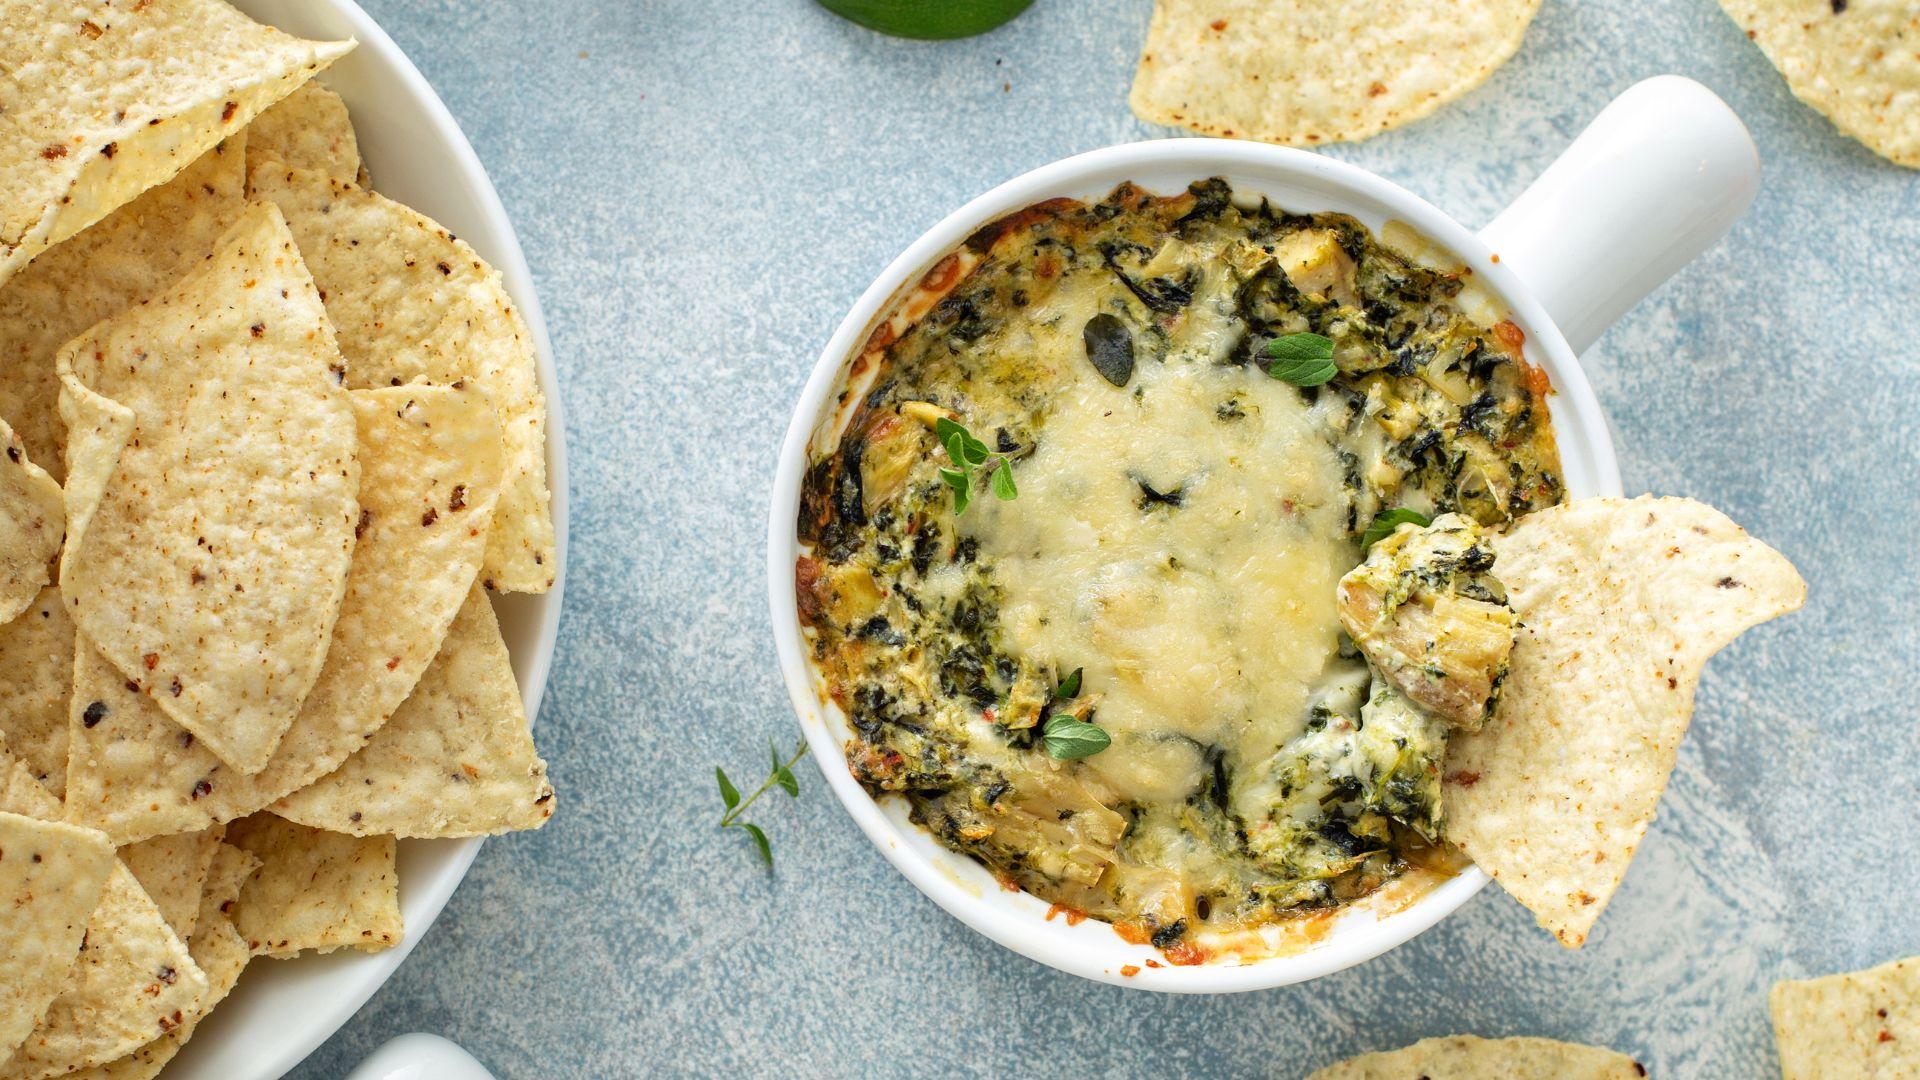 Cannabis-Infused Spinach and Artichoke Dip